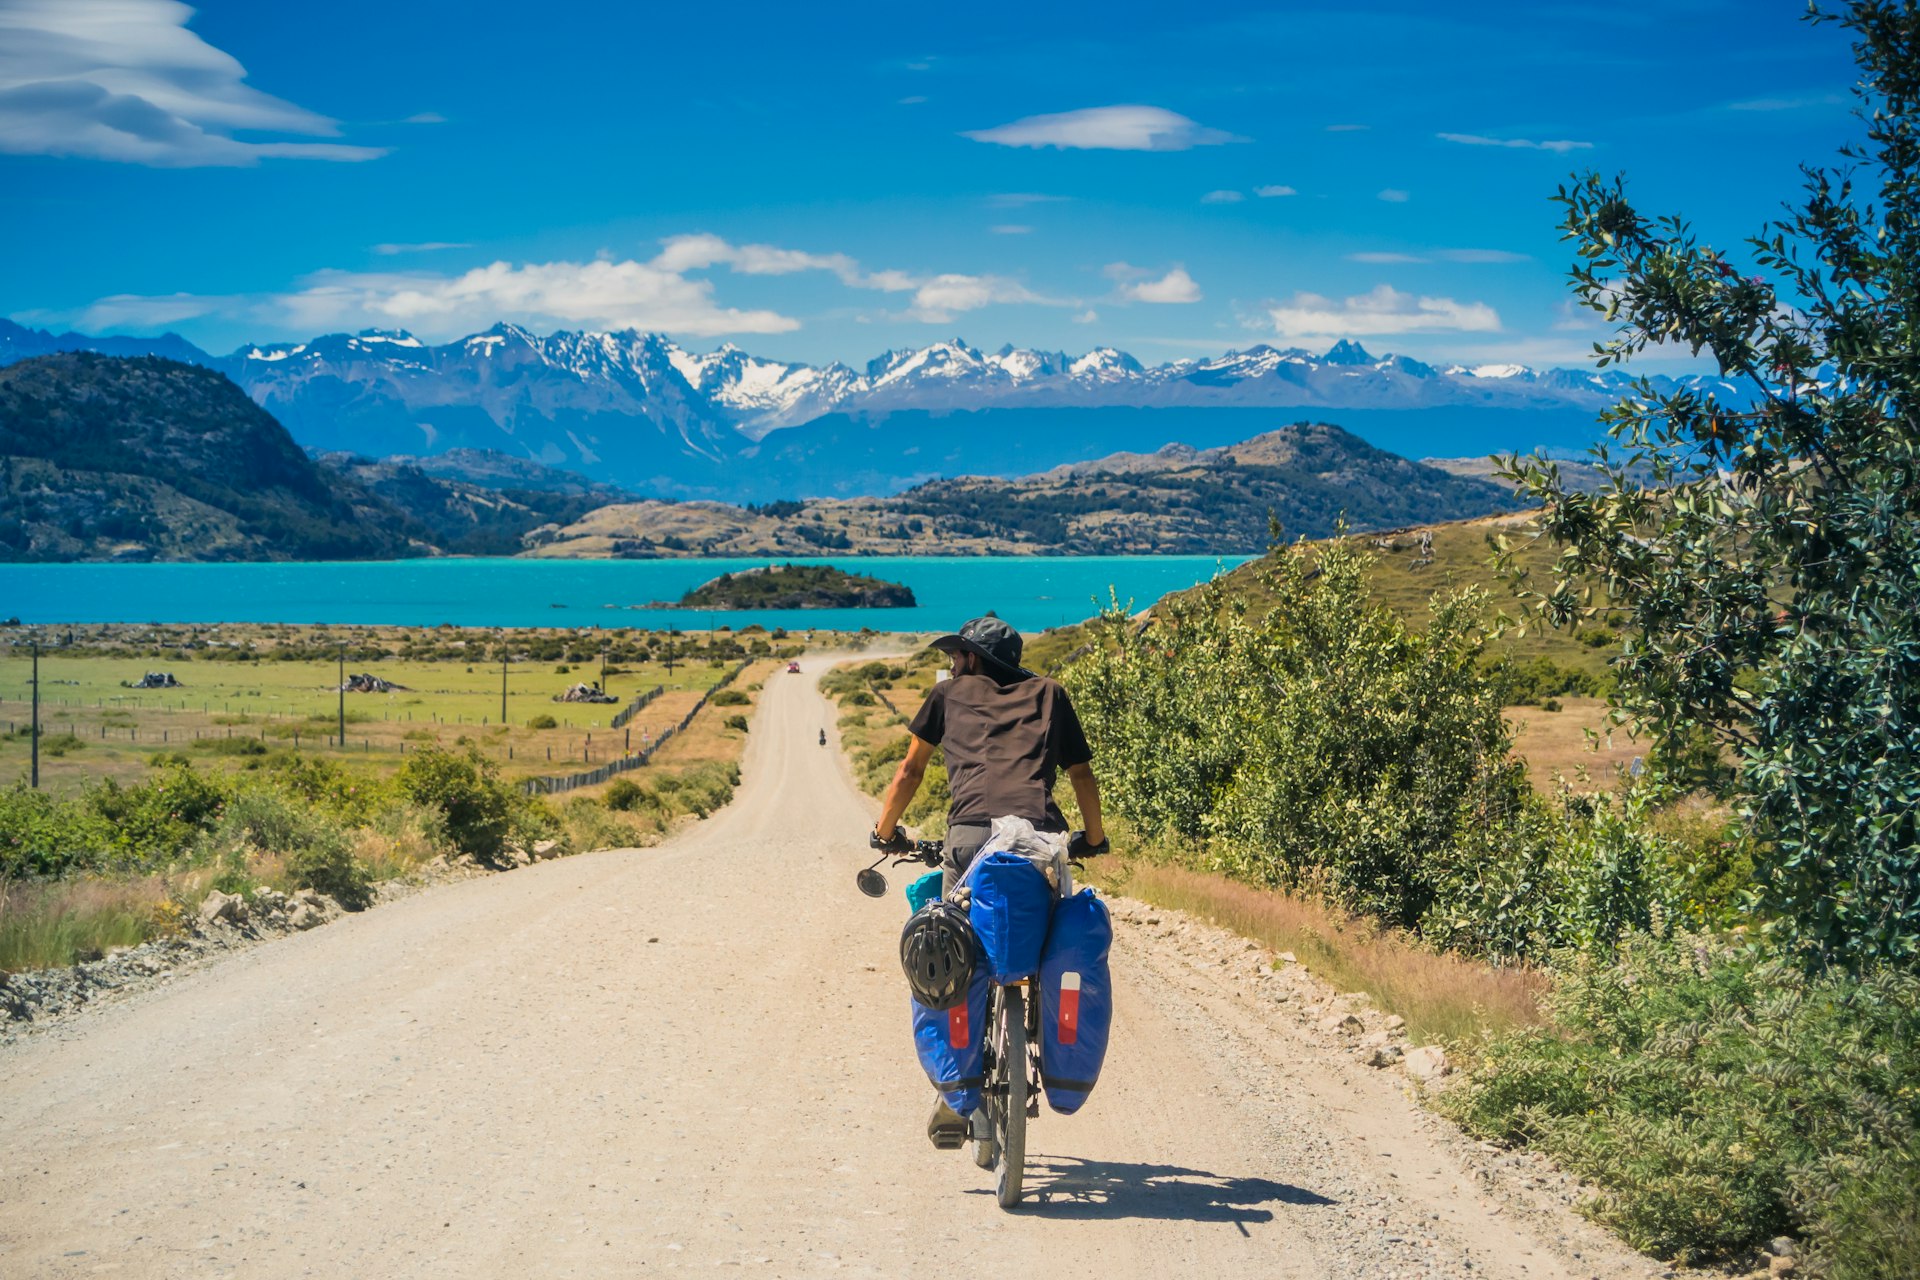 A male bicycle tourer on a dirt road of the Carretera Austral highway as it heads to a blue lake and gray mountains.